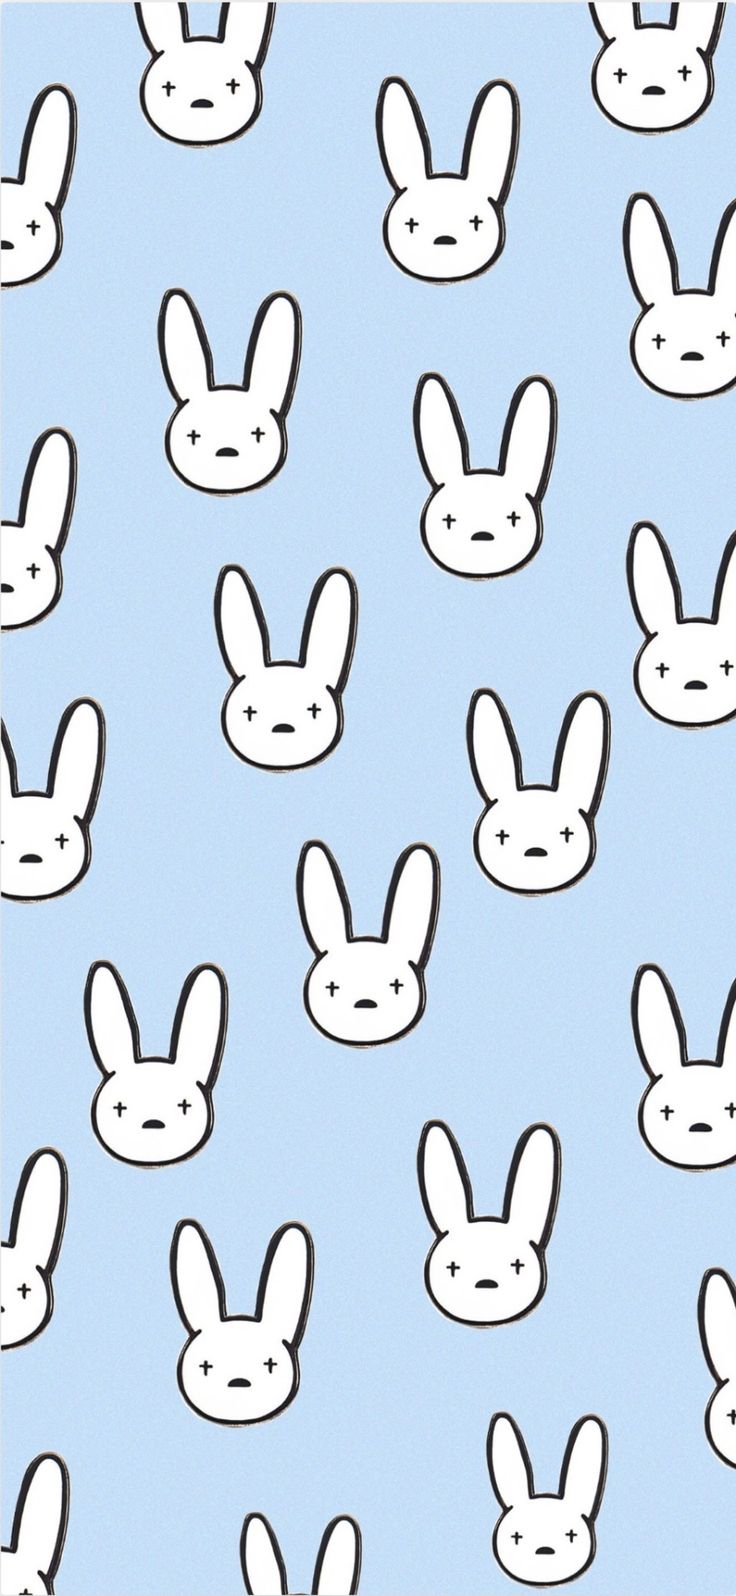 Faves Ideas Bunny Wallpaper Pictures Fashion